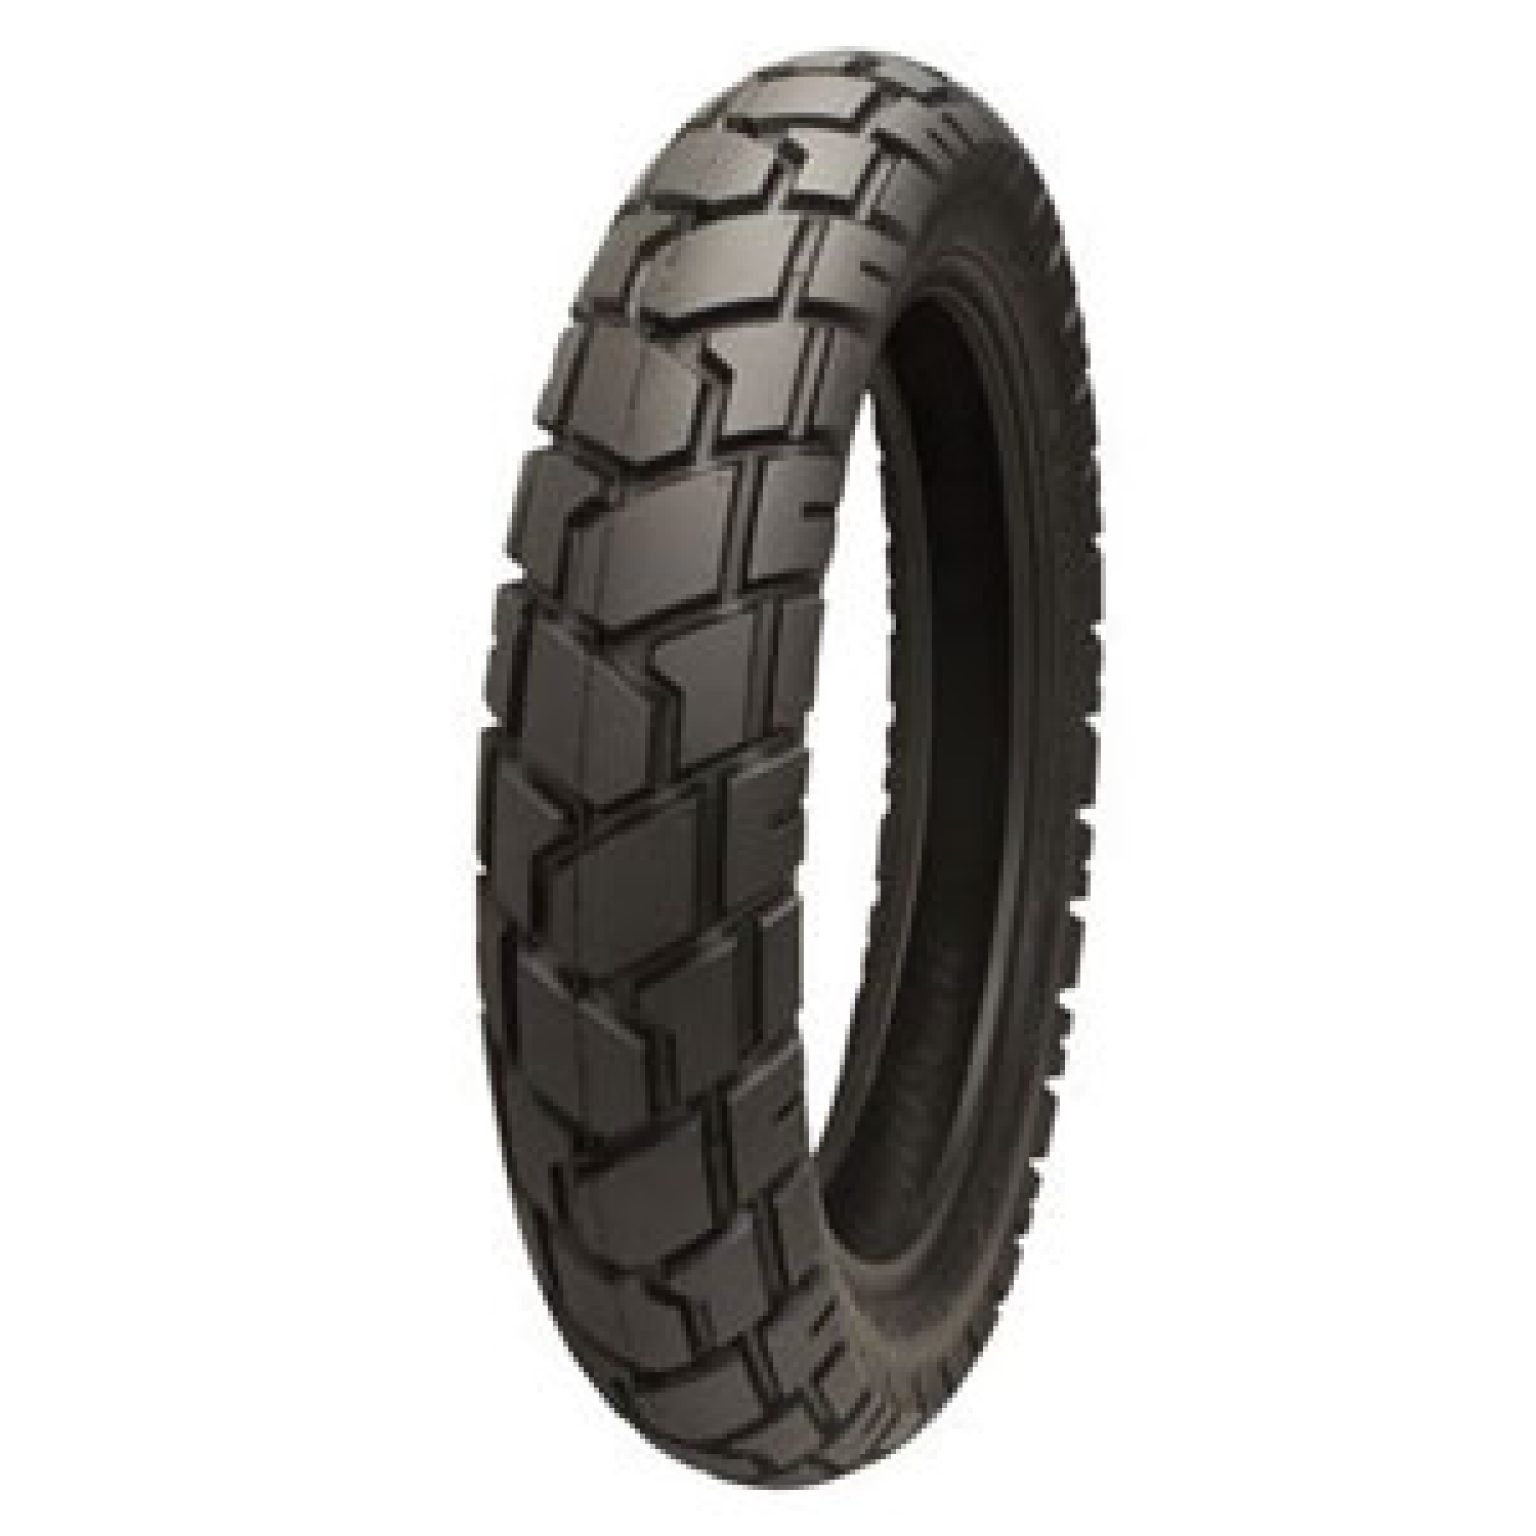 Best Dual Sport Tires for Motorcycles - 8 Adventure Options